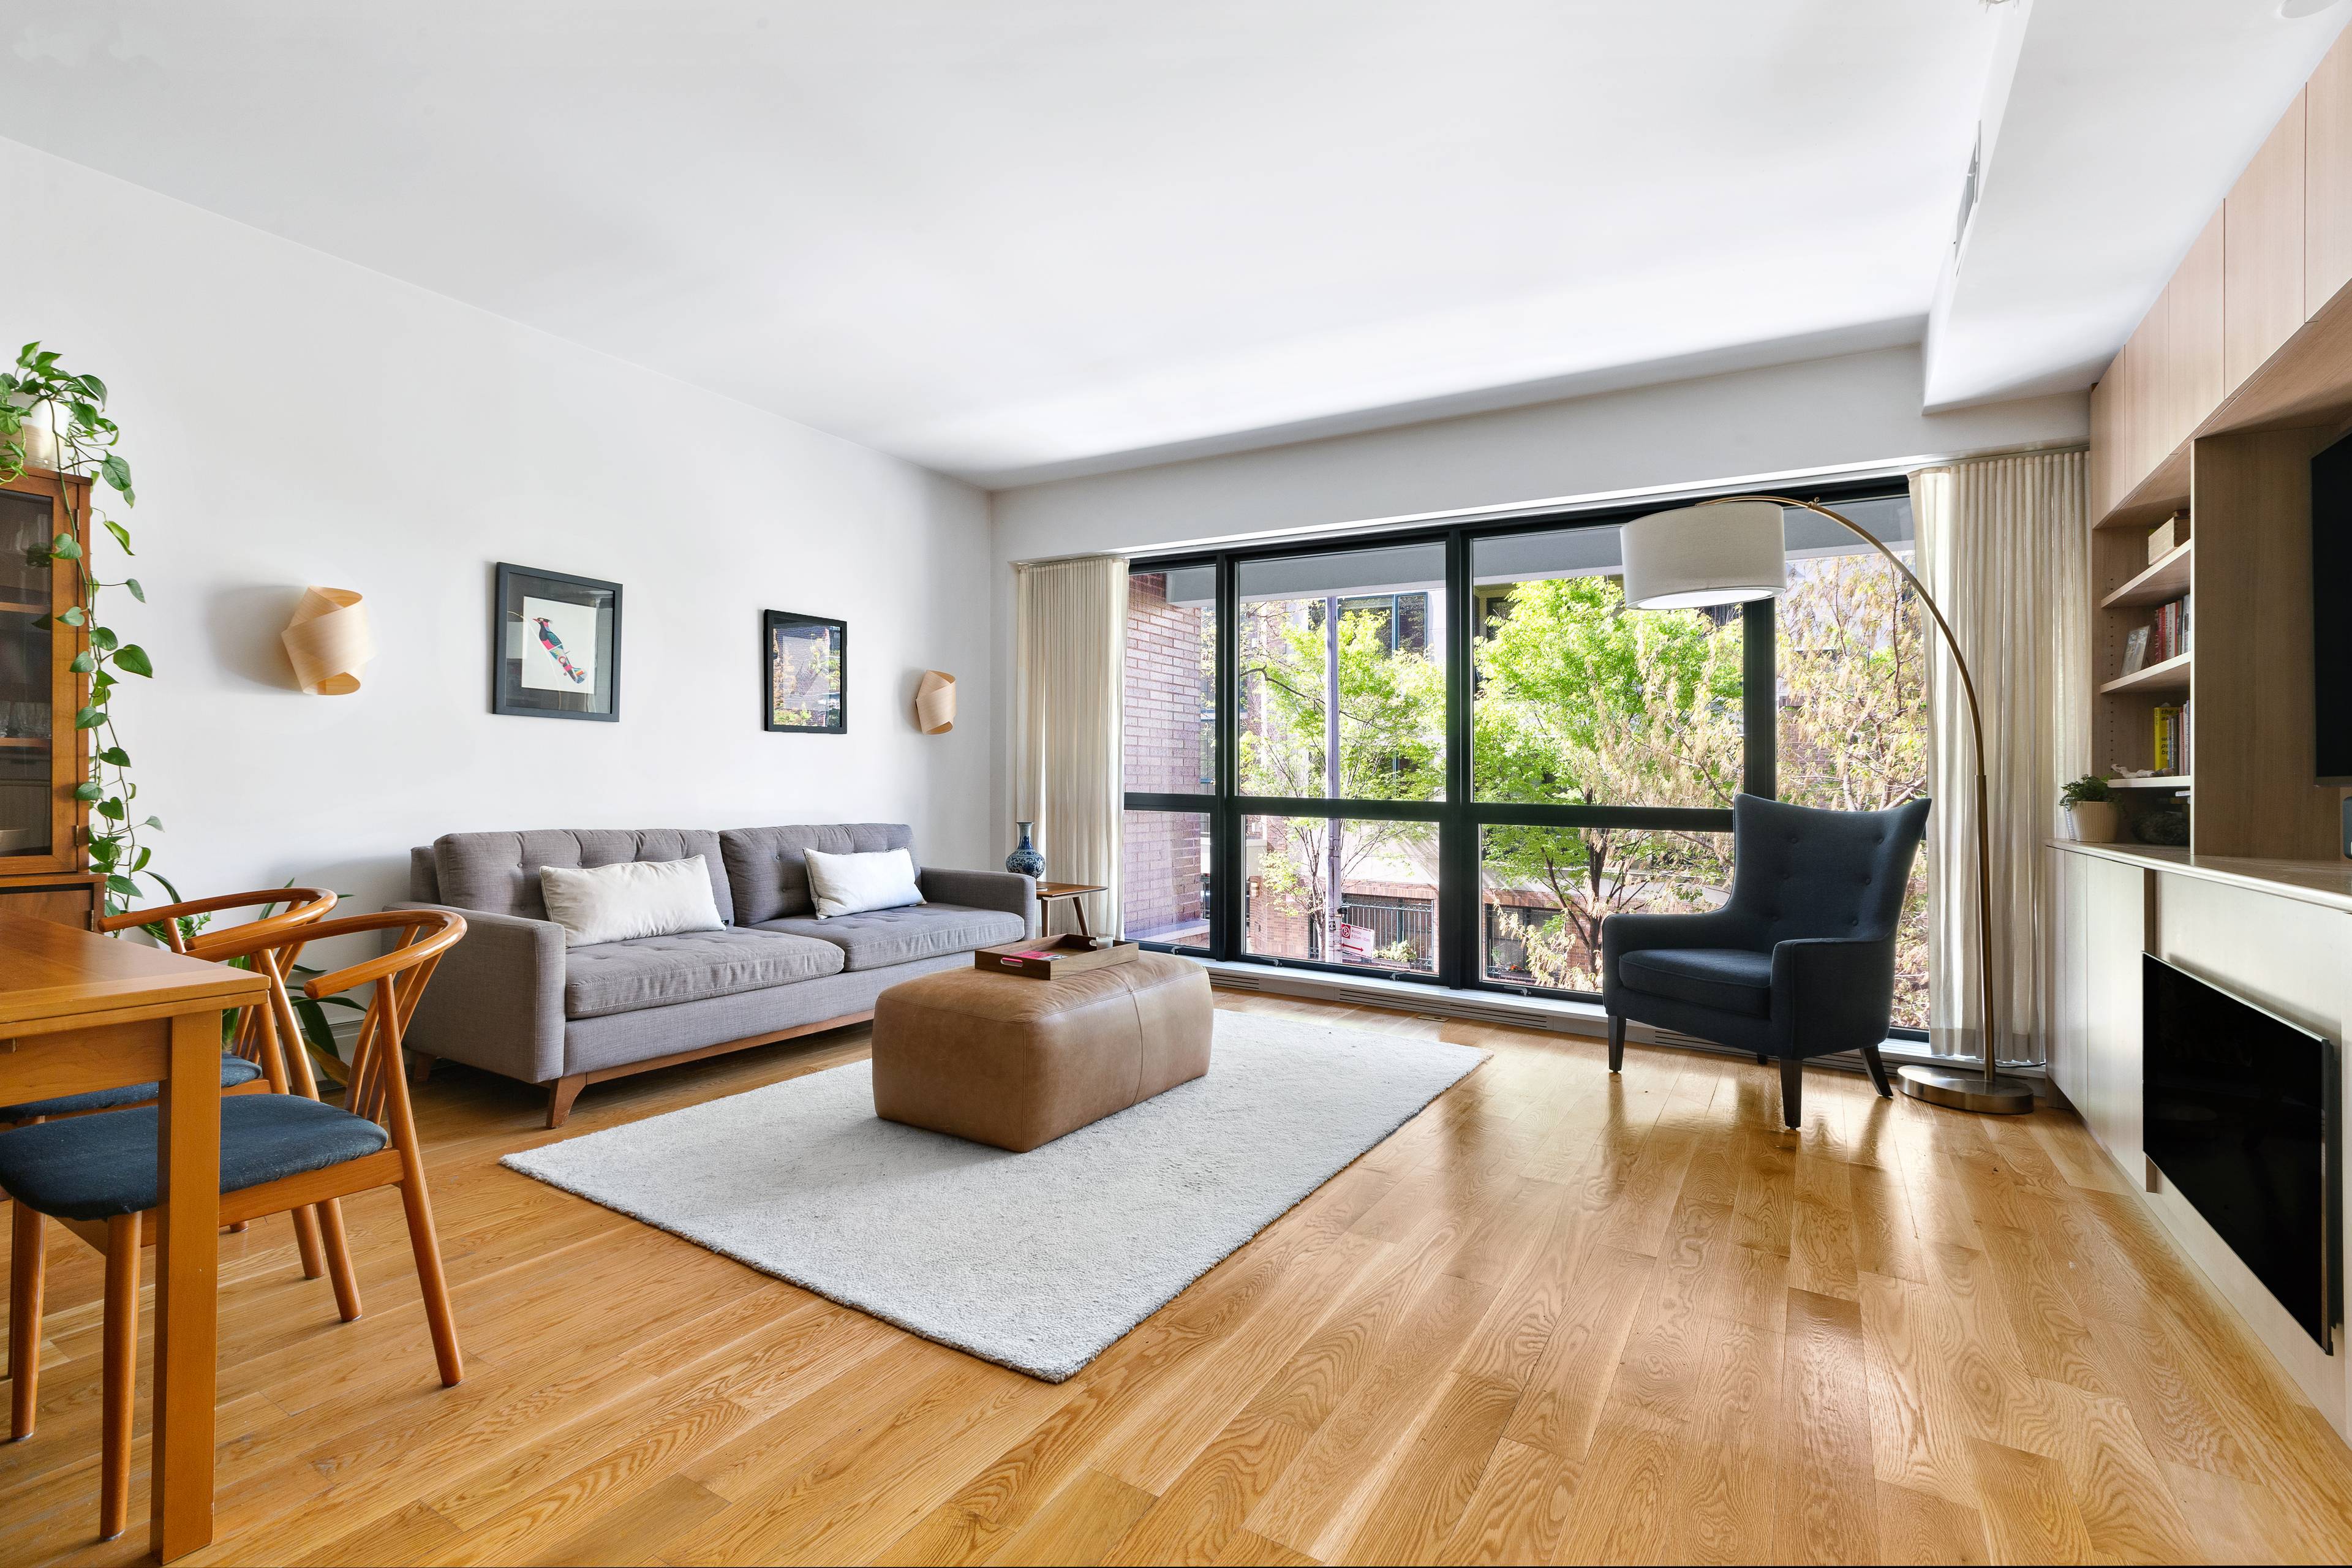 Ideally located on a tree lined residential block, where Cobble Hill and Boerum Hill intersect, 47 Dean Street Apt.